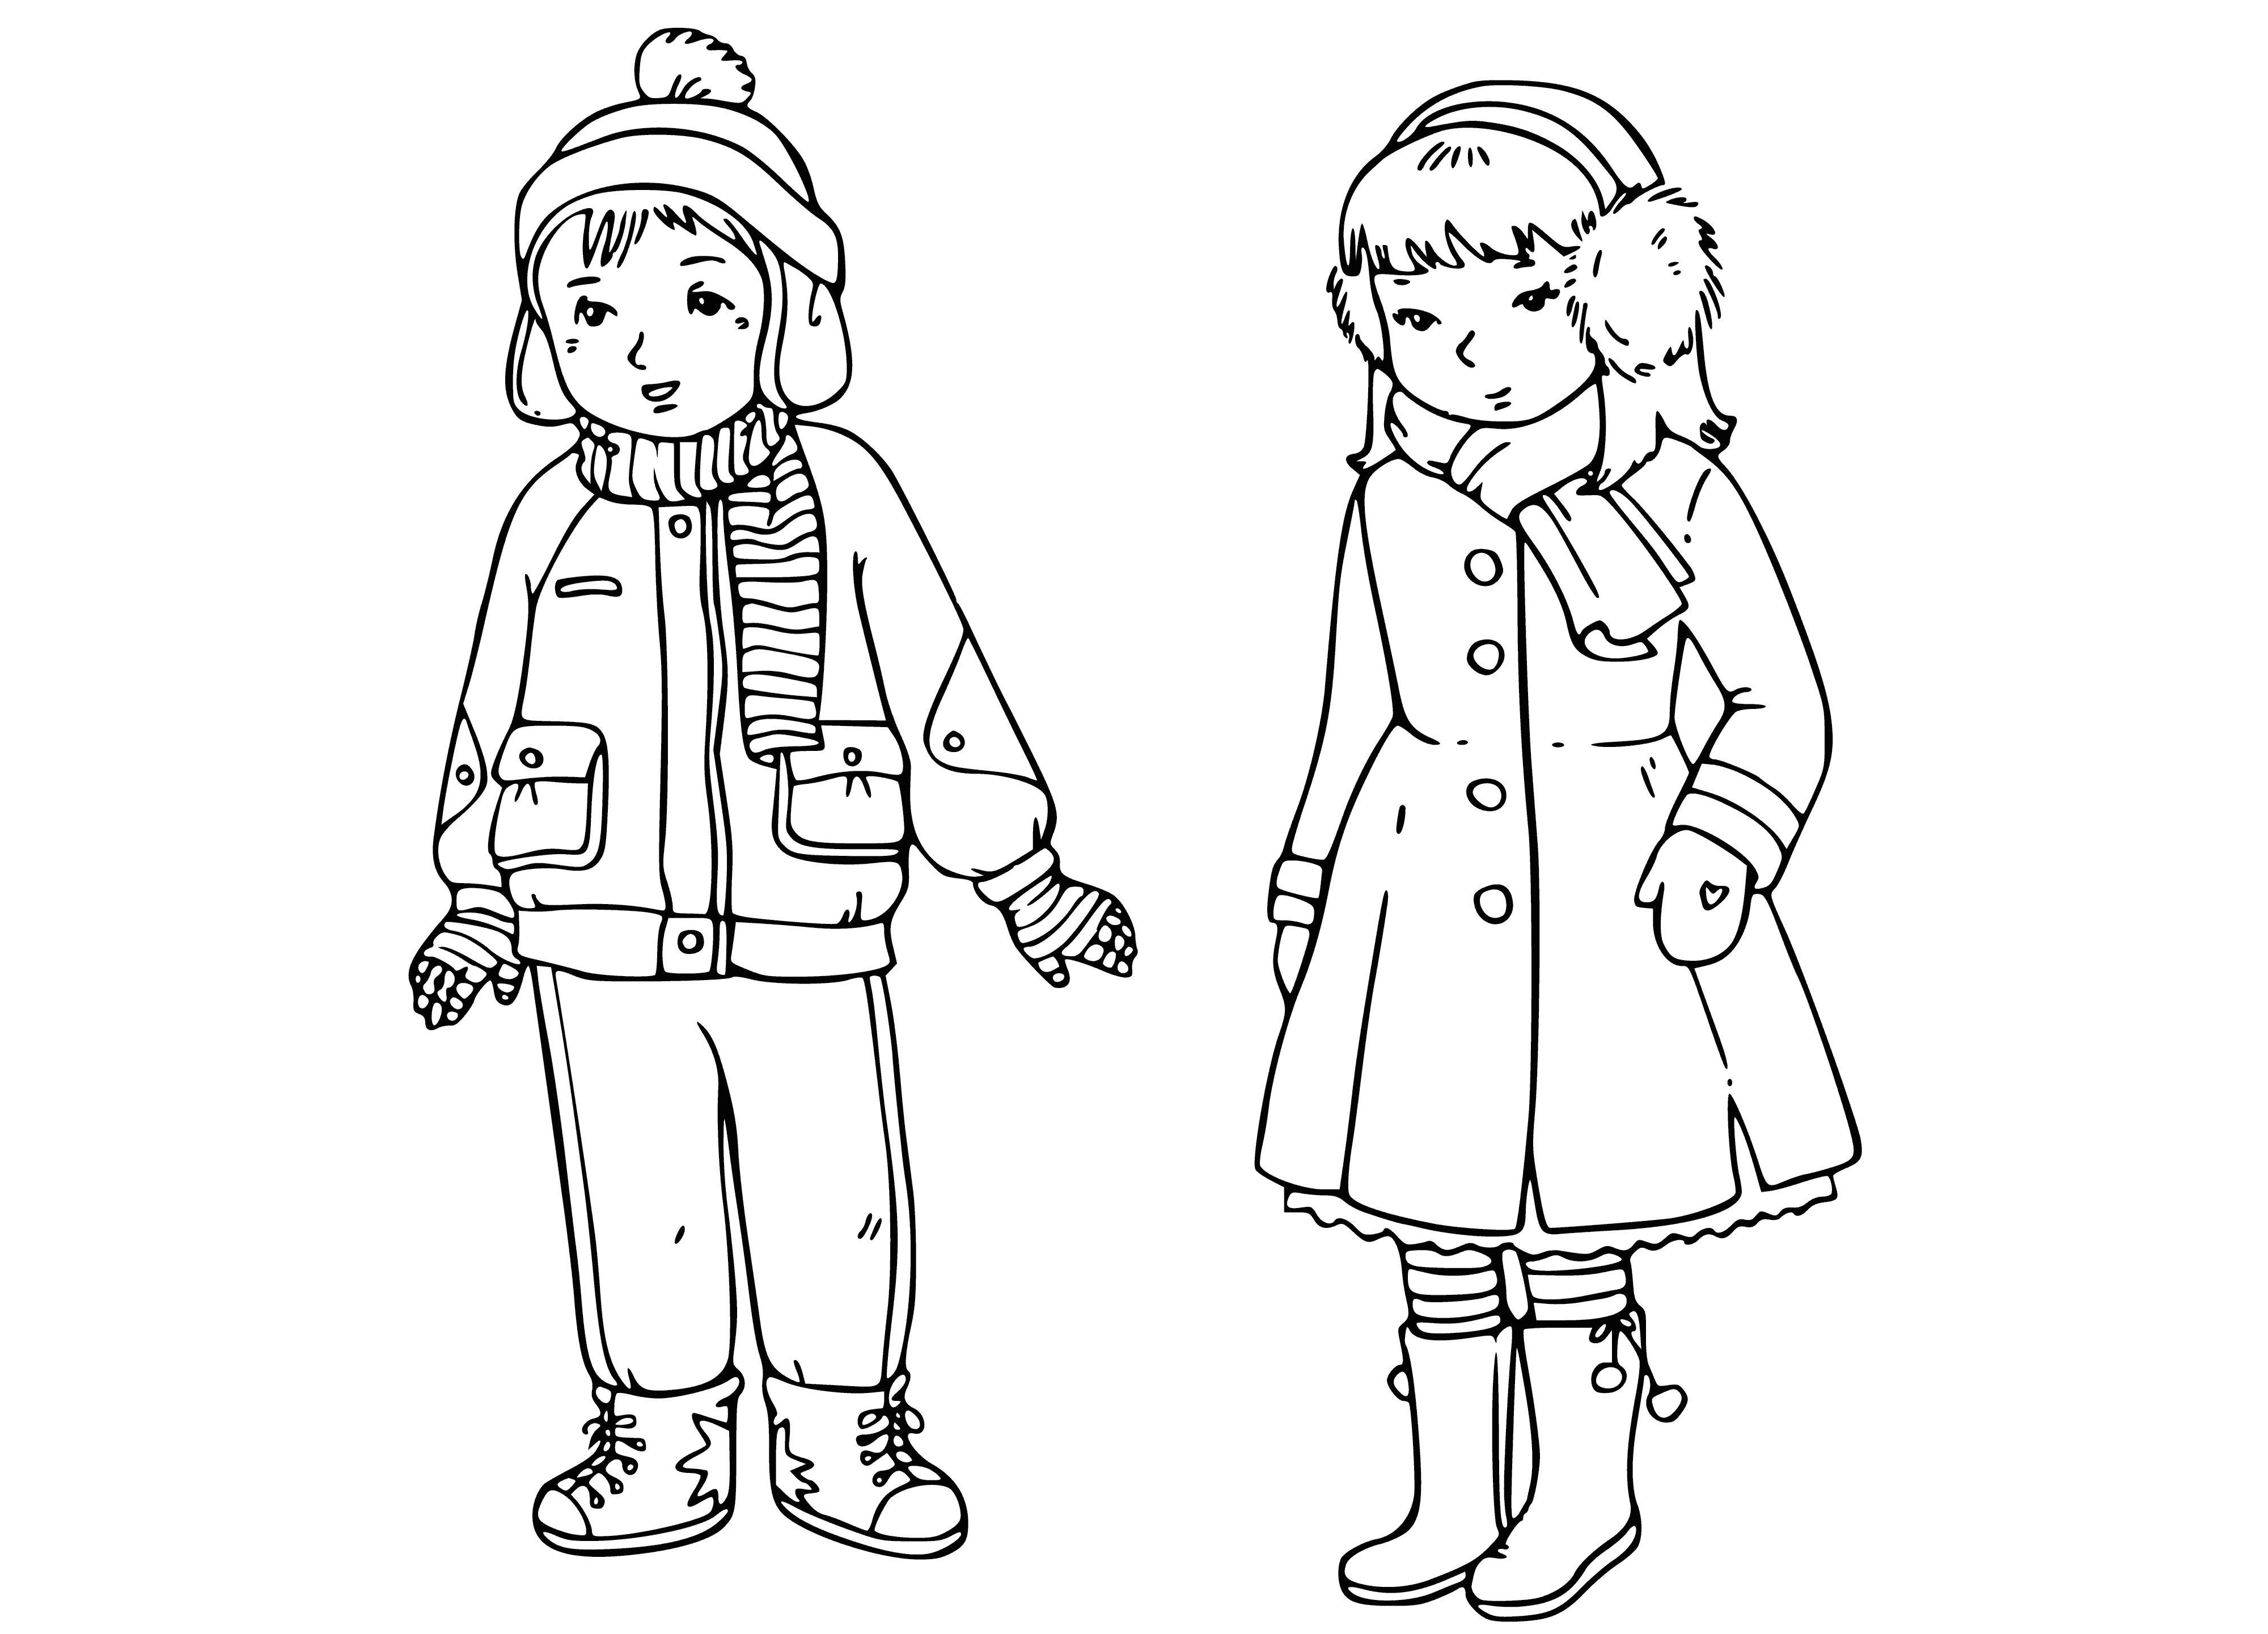 coloring page: Kids in winter clothes holding ice skates and snowflakes, wearing hats, scarves, and gloves. A perfect pic to color! #winter